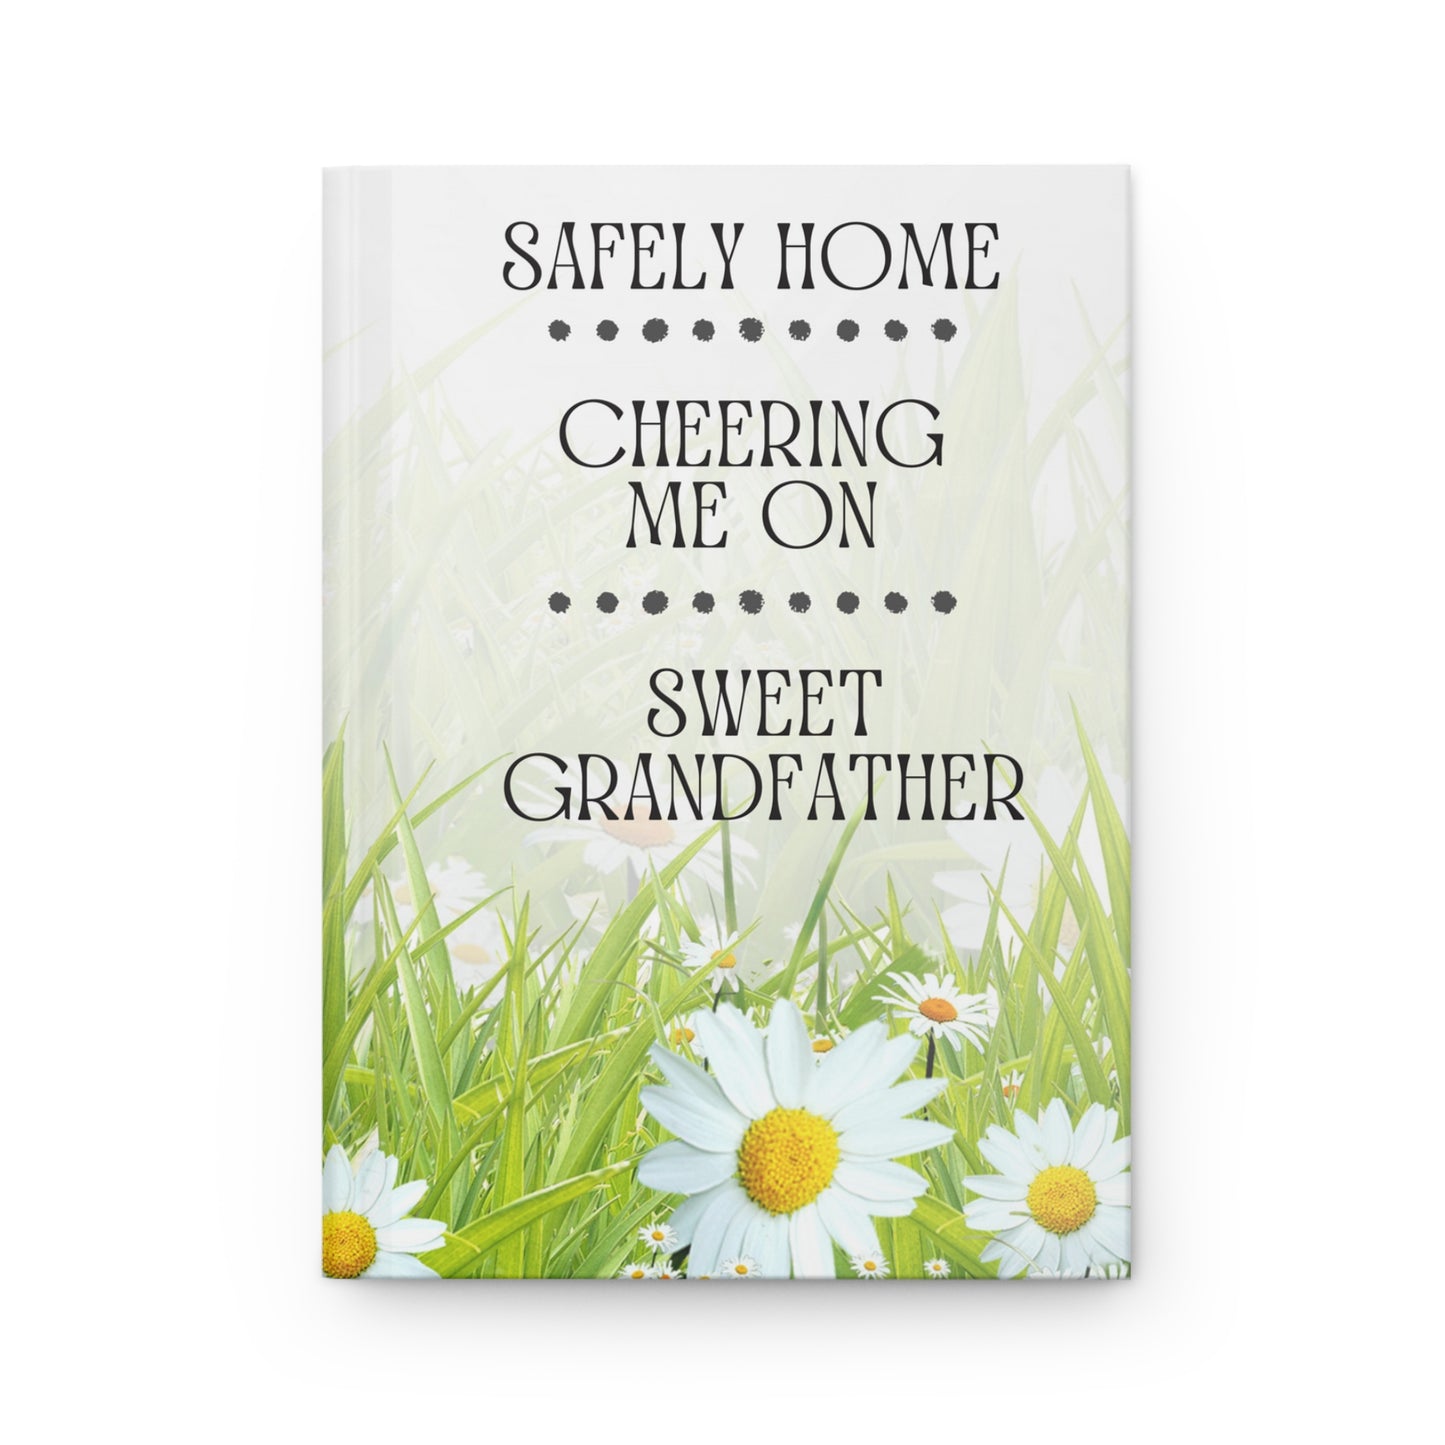 Grief Journal for Loss of Grandfather, Safely Home Cheering Me On